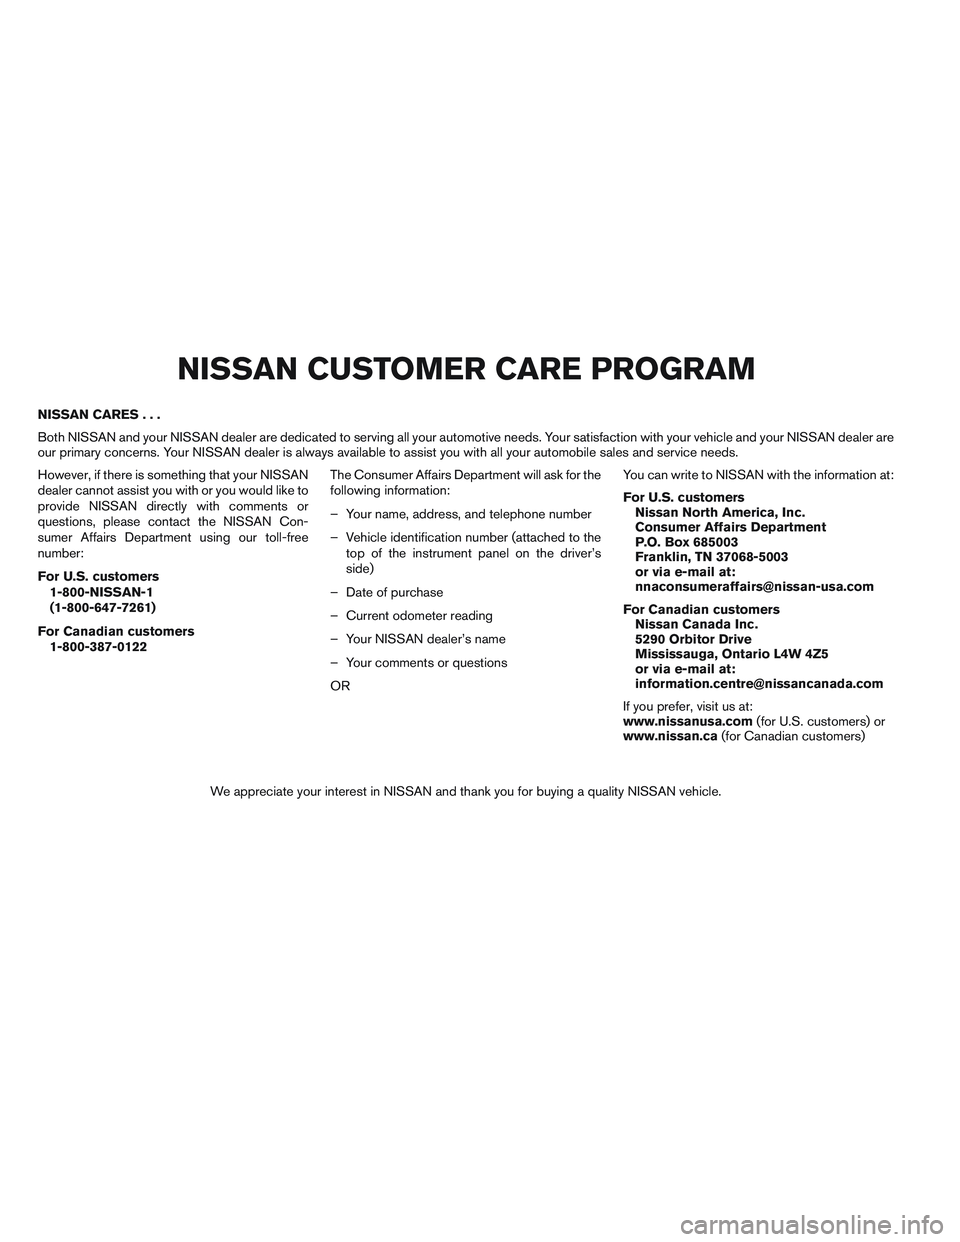 NISSAN ALTIMA SEDAN 2013  Owners Manual NISSAN CARES...
Both NISSAN and your NISSAN dealer are dedicated to serving all your automotive needs. Your satisfaction with your vehicle and your NISSAN dealer are
our primary concerns. Your NISSAN 